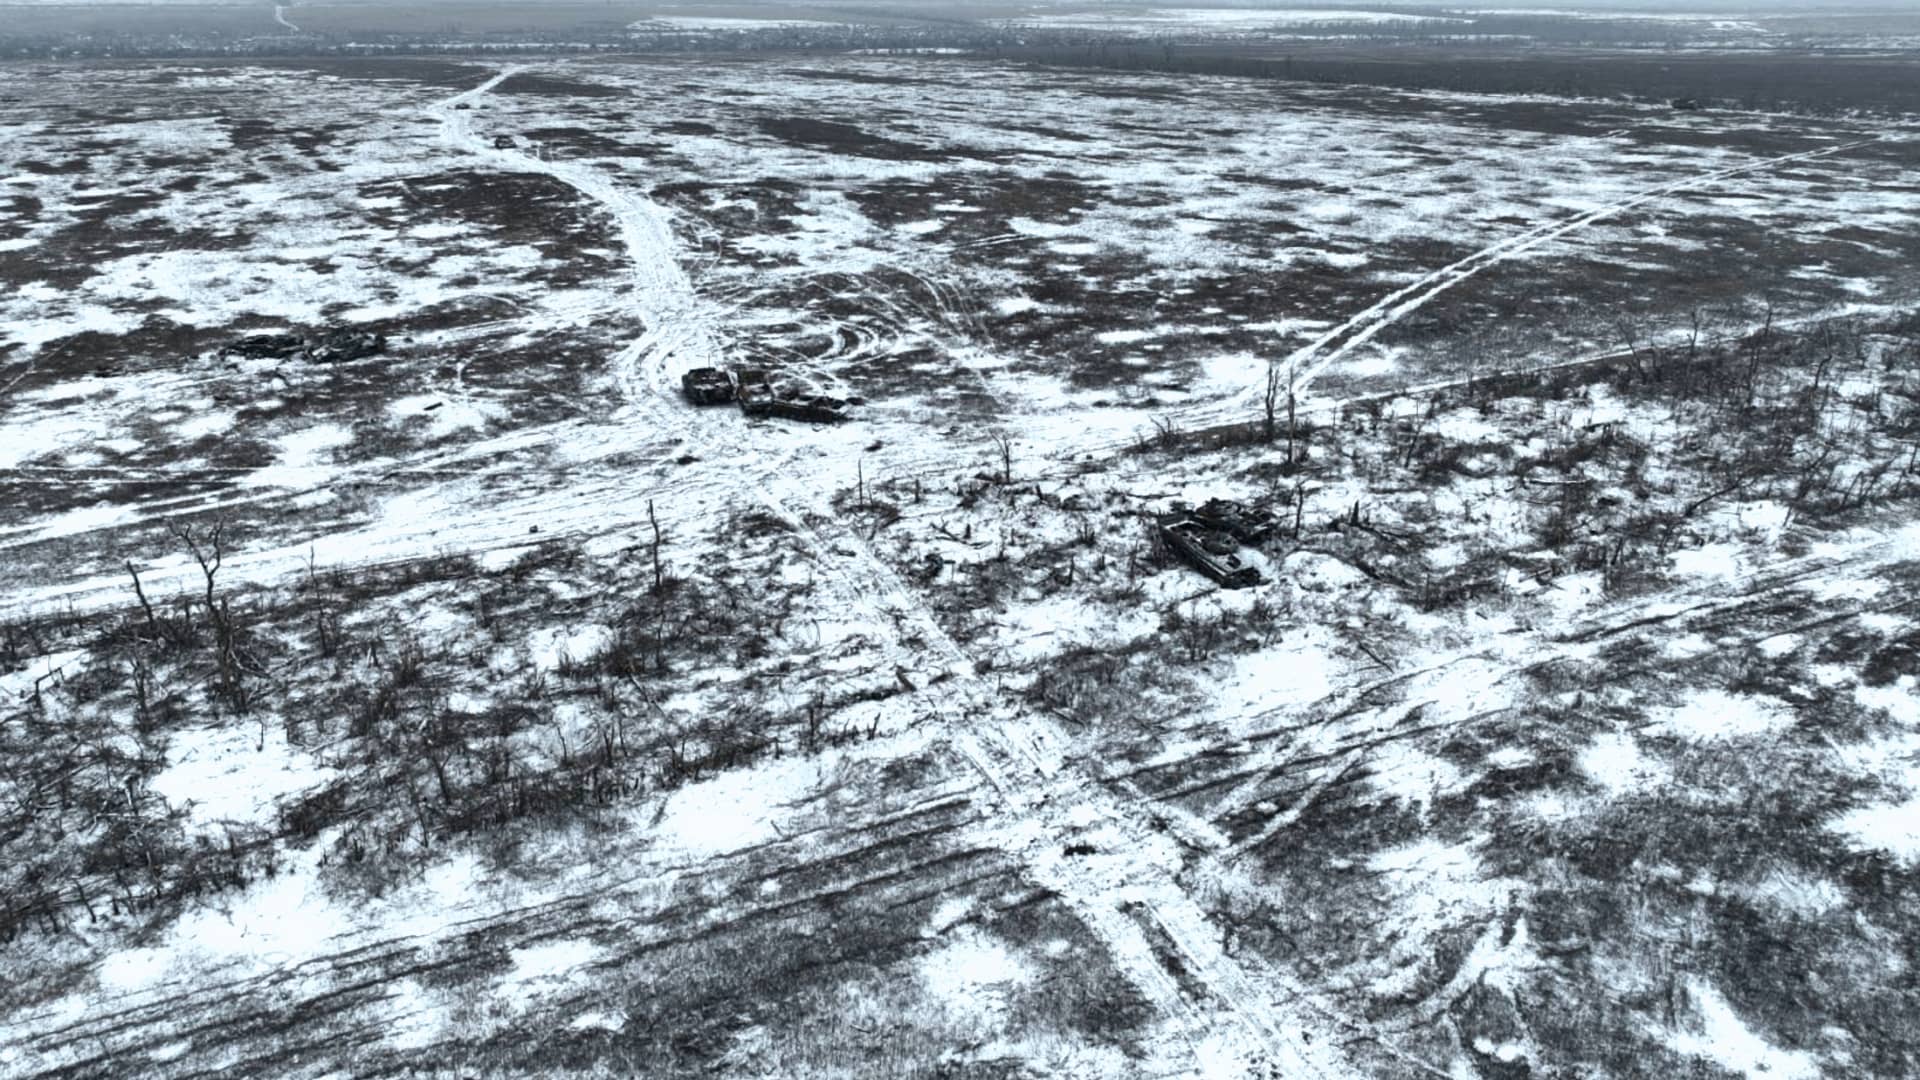  A snowy field with traces of artillery and recently destroyed Russian heavy equipment on the outskirts of the city on January 25, 2023 in Avdiivka, Ukraine. Both Ukraine and Russia have recently claimed gains in the Avdiivka, where Russia is continuing a long-running campaign to capture the city, located in the Ukraine's eastern Donetsk Region. 